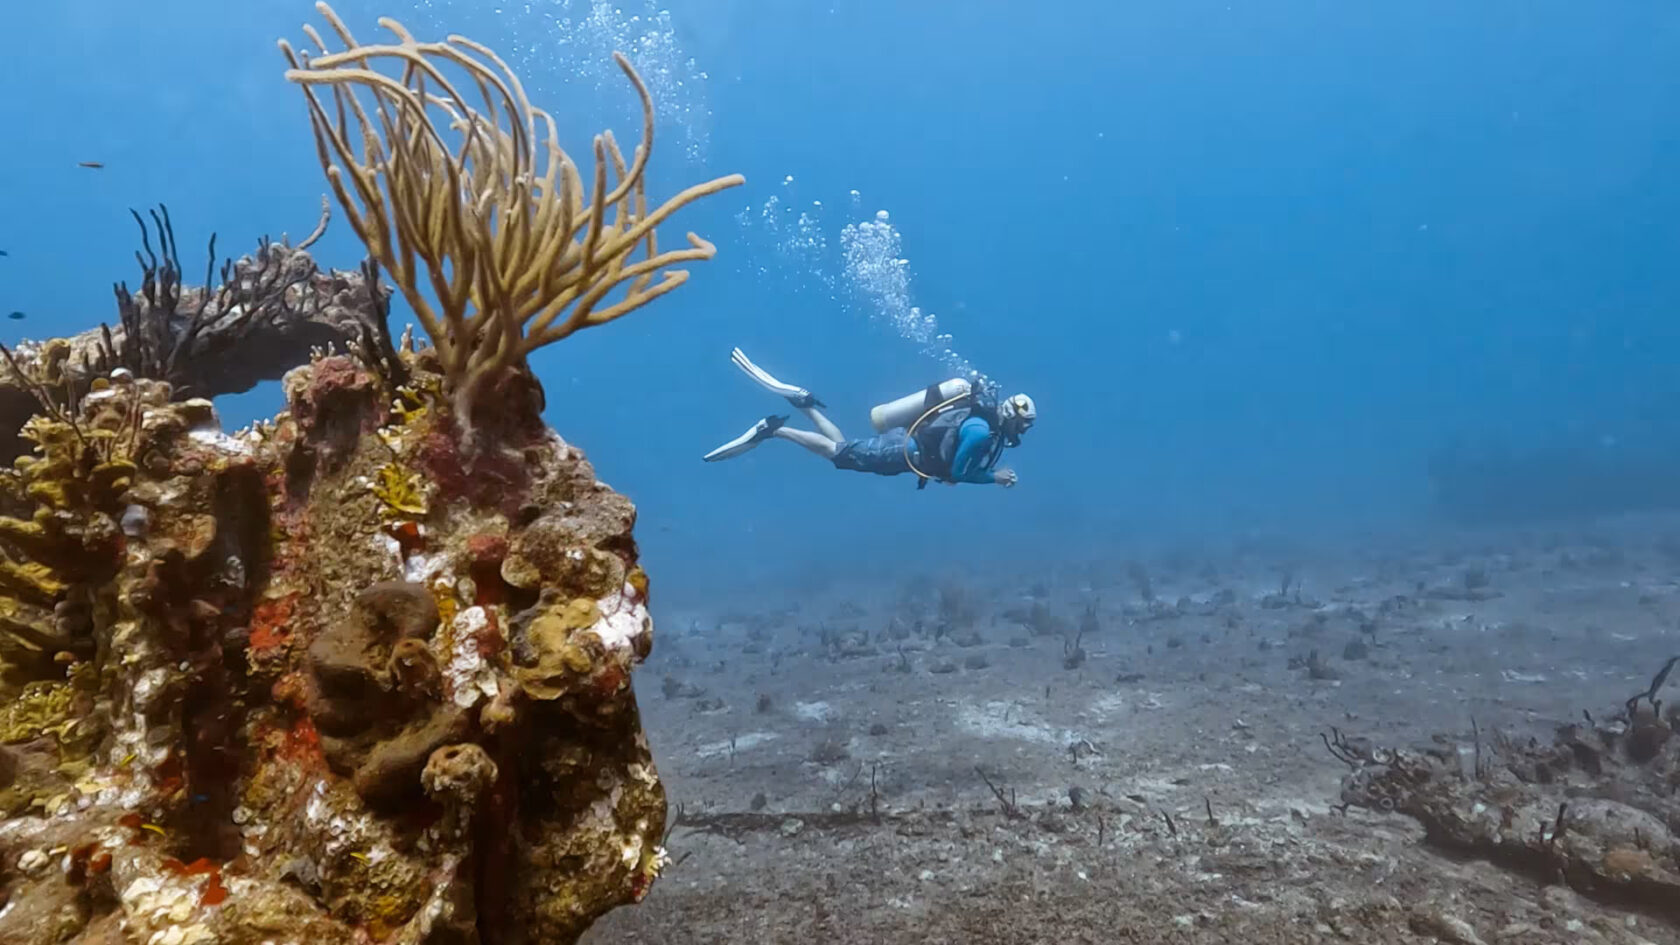 A diver is scuba diving near a coral reef.